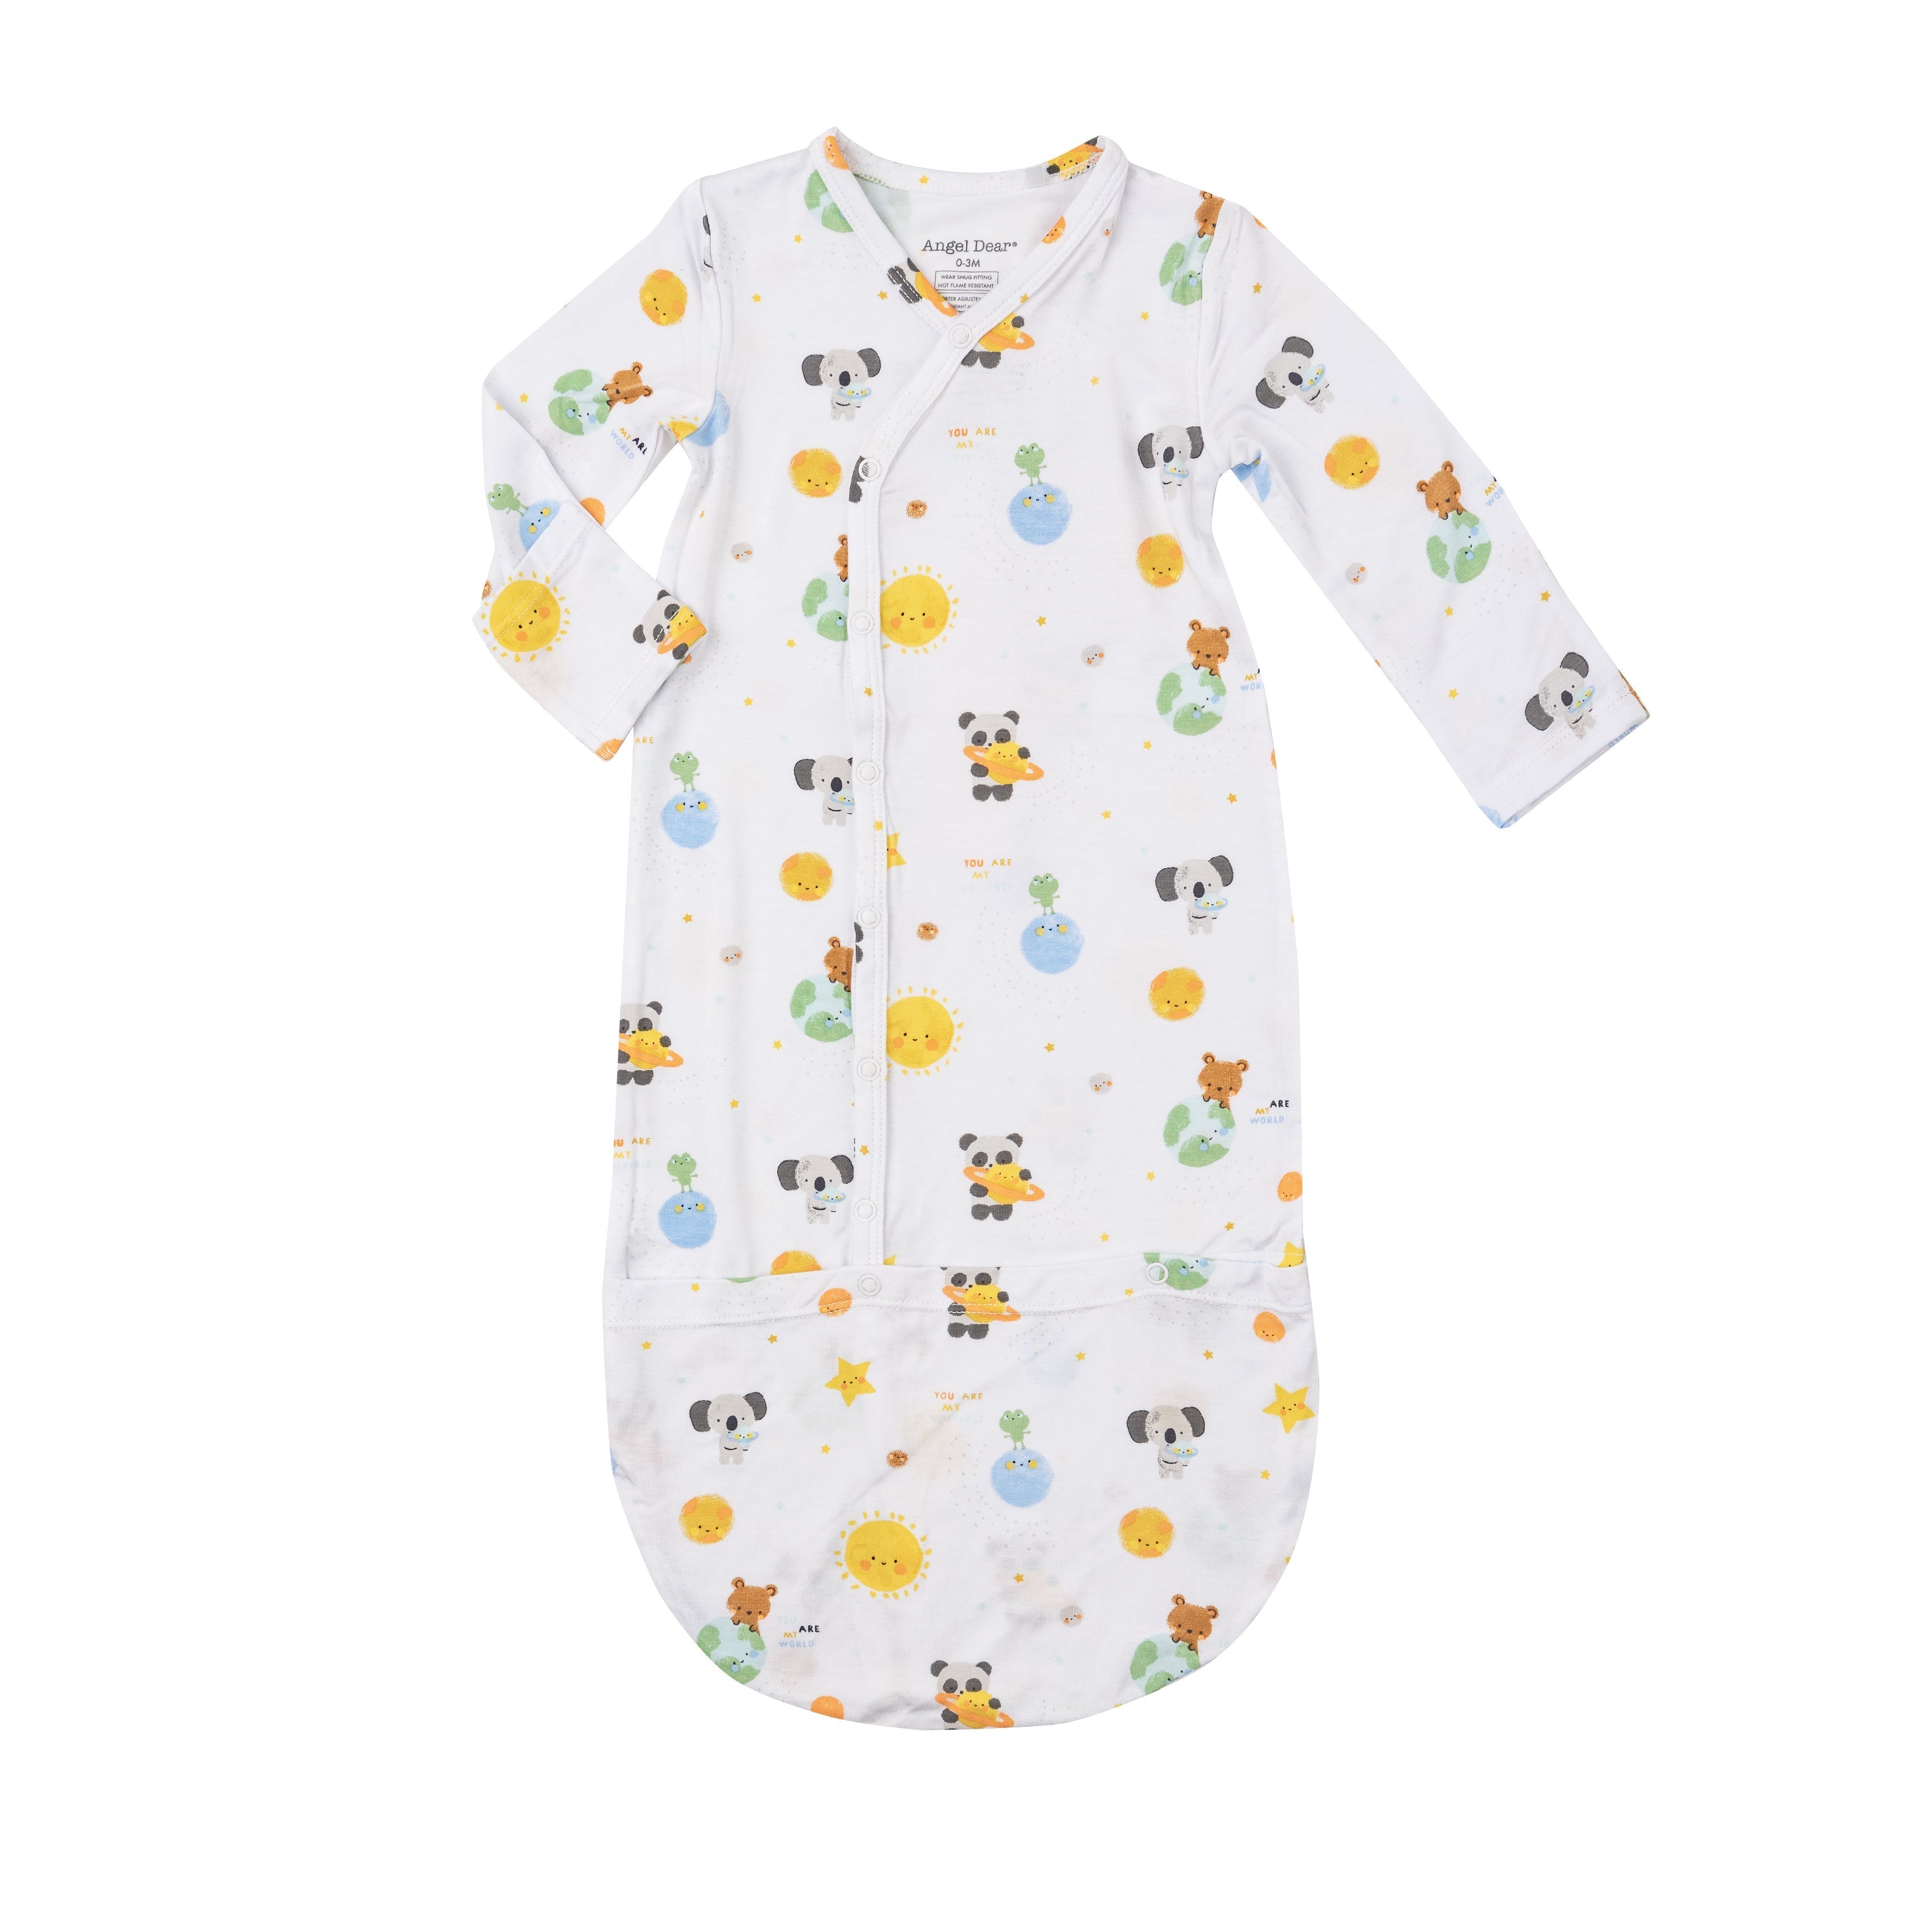 Bundle Gown - Baby Solar System